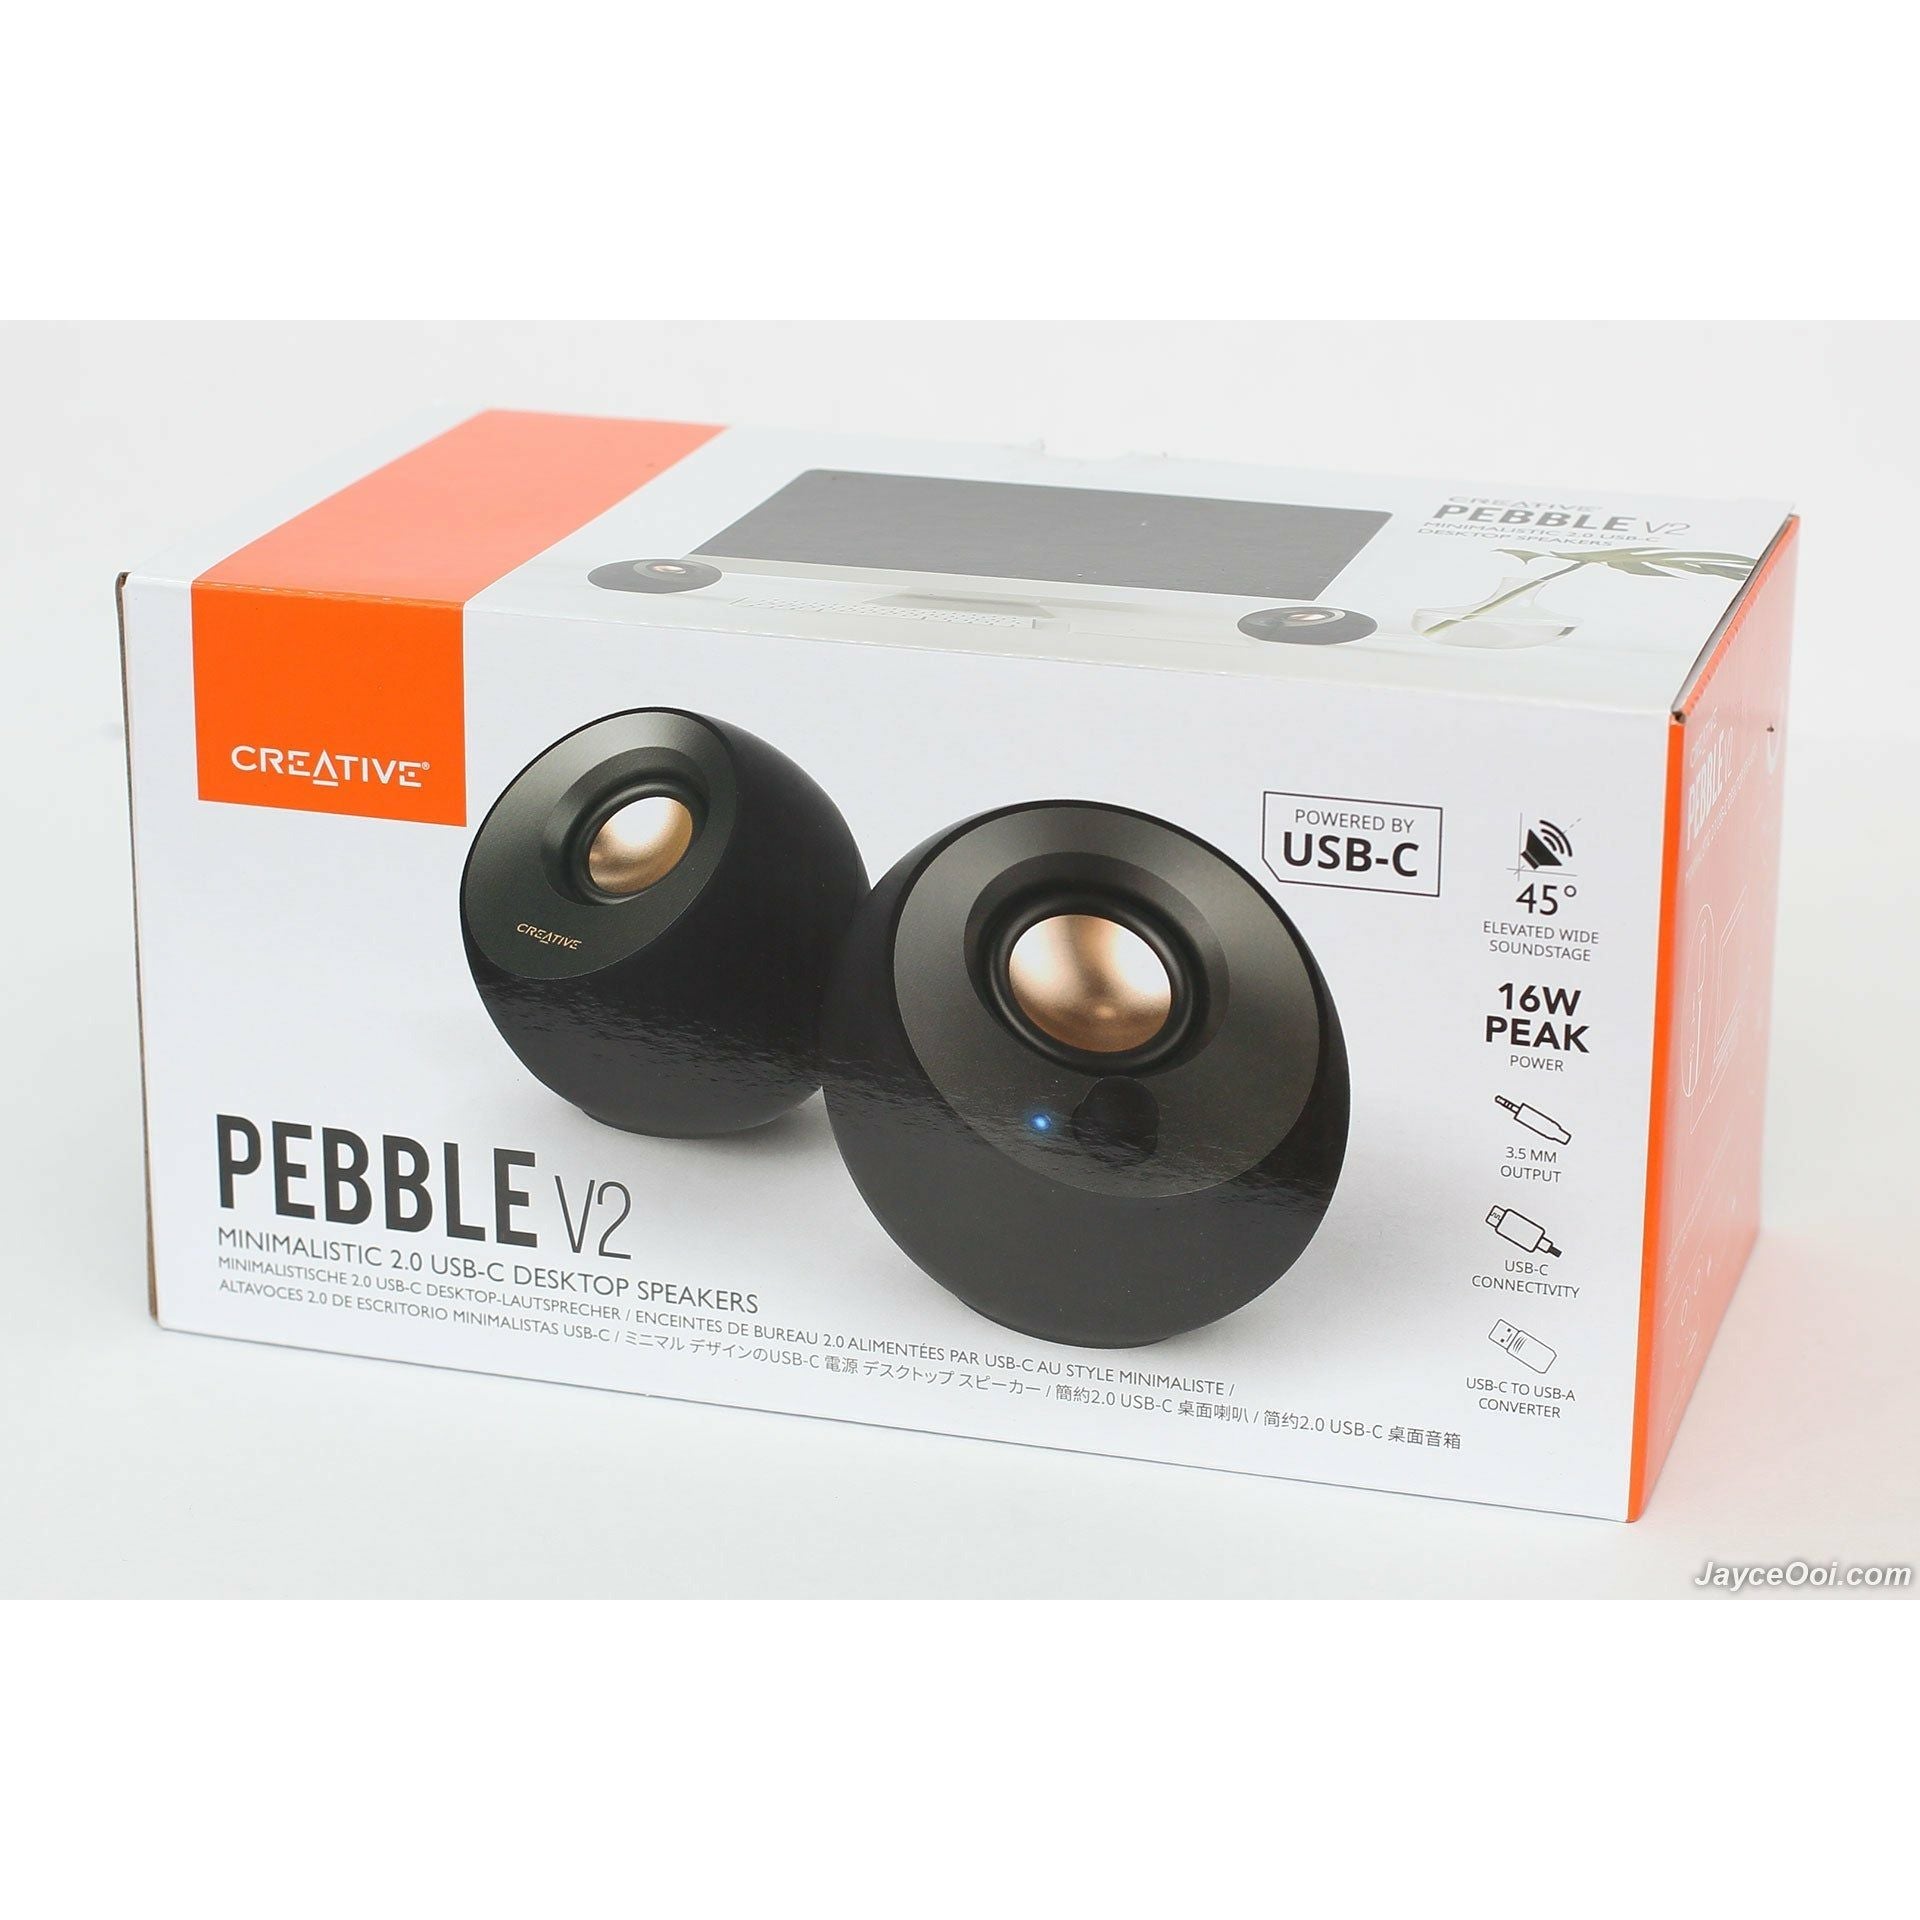 Creative Pebble V2 Review - Desktop Speakers with USB-C 